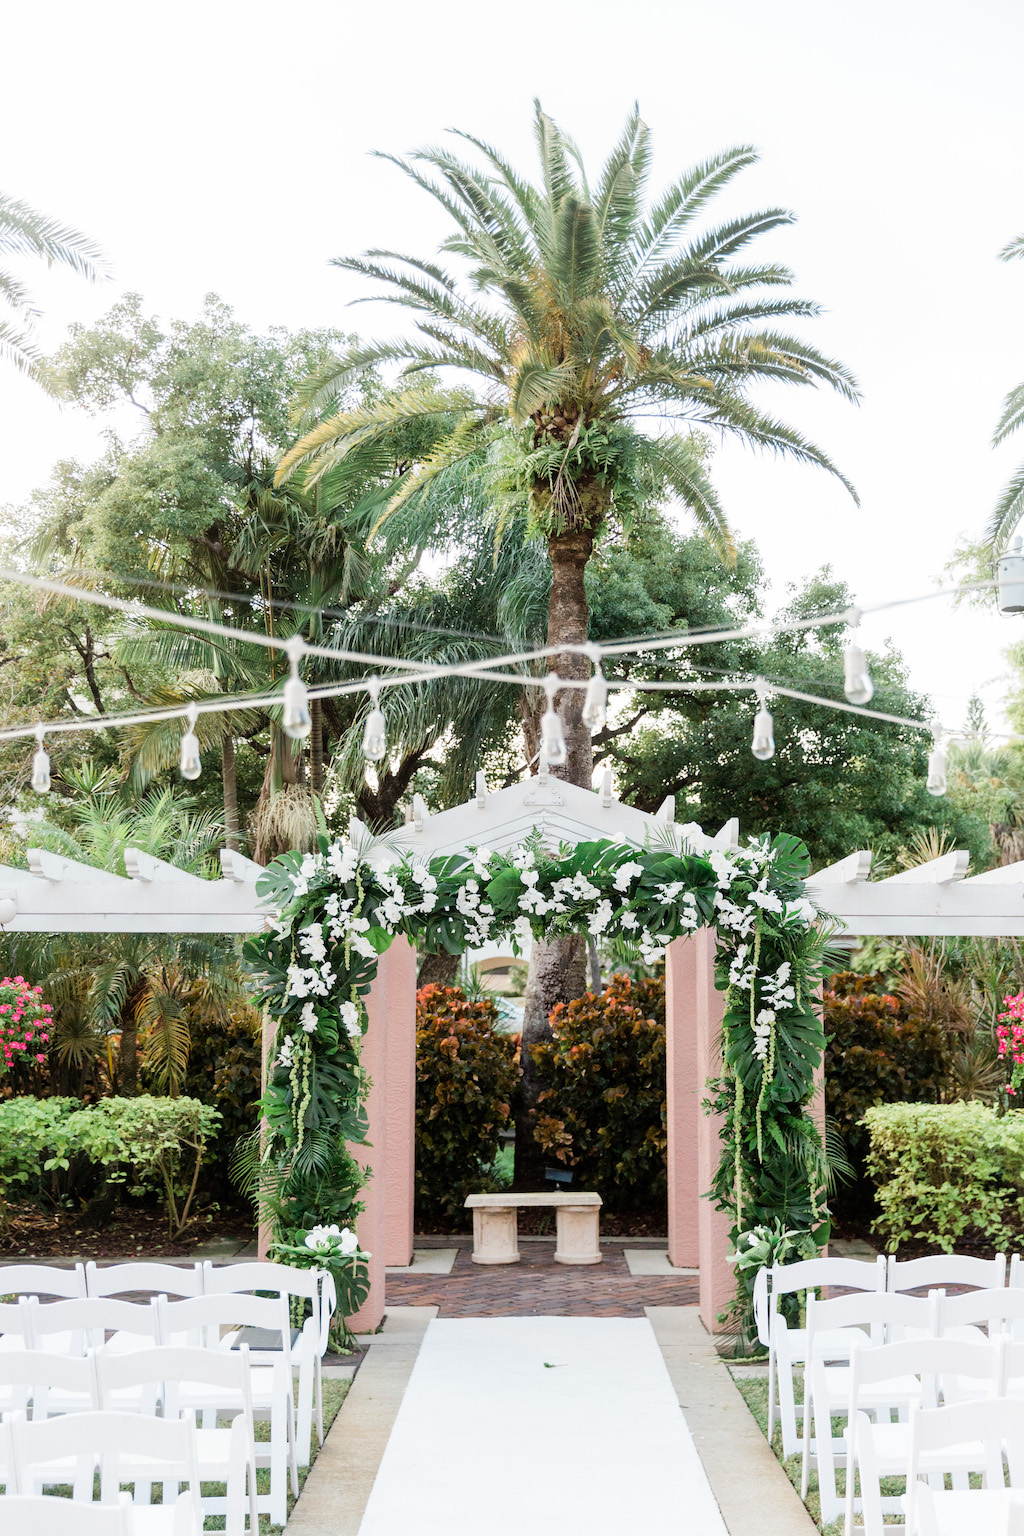 Romantic, Modern, Tropical Wedding Decor, Ceremony Arch with Monstera Leaves, Green Palm Fronds, White Orchids, Hanging Lights | The Tea Garden at The Vinoy Renaissance St. Petersburg Resort & Golf Club | Tampa Bay Florist Bruce Wayne Florals Florida Luxury Wedding Planner Parties A'La Carte